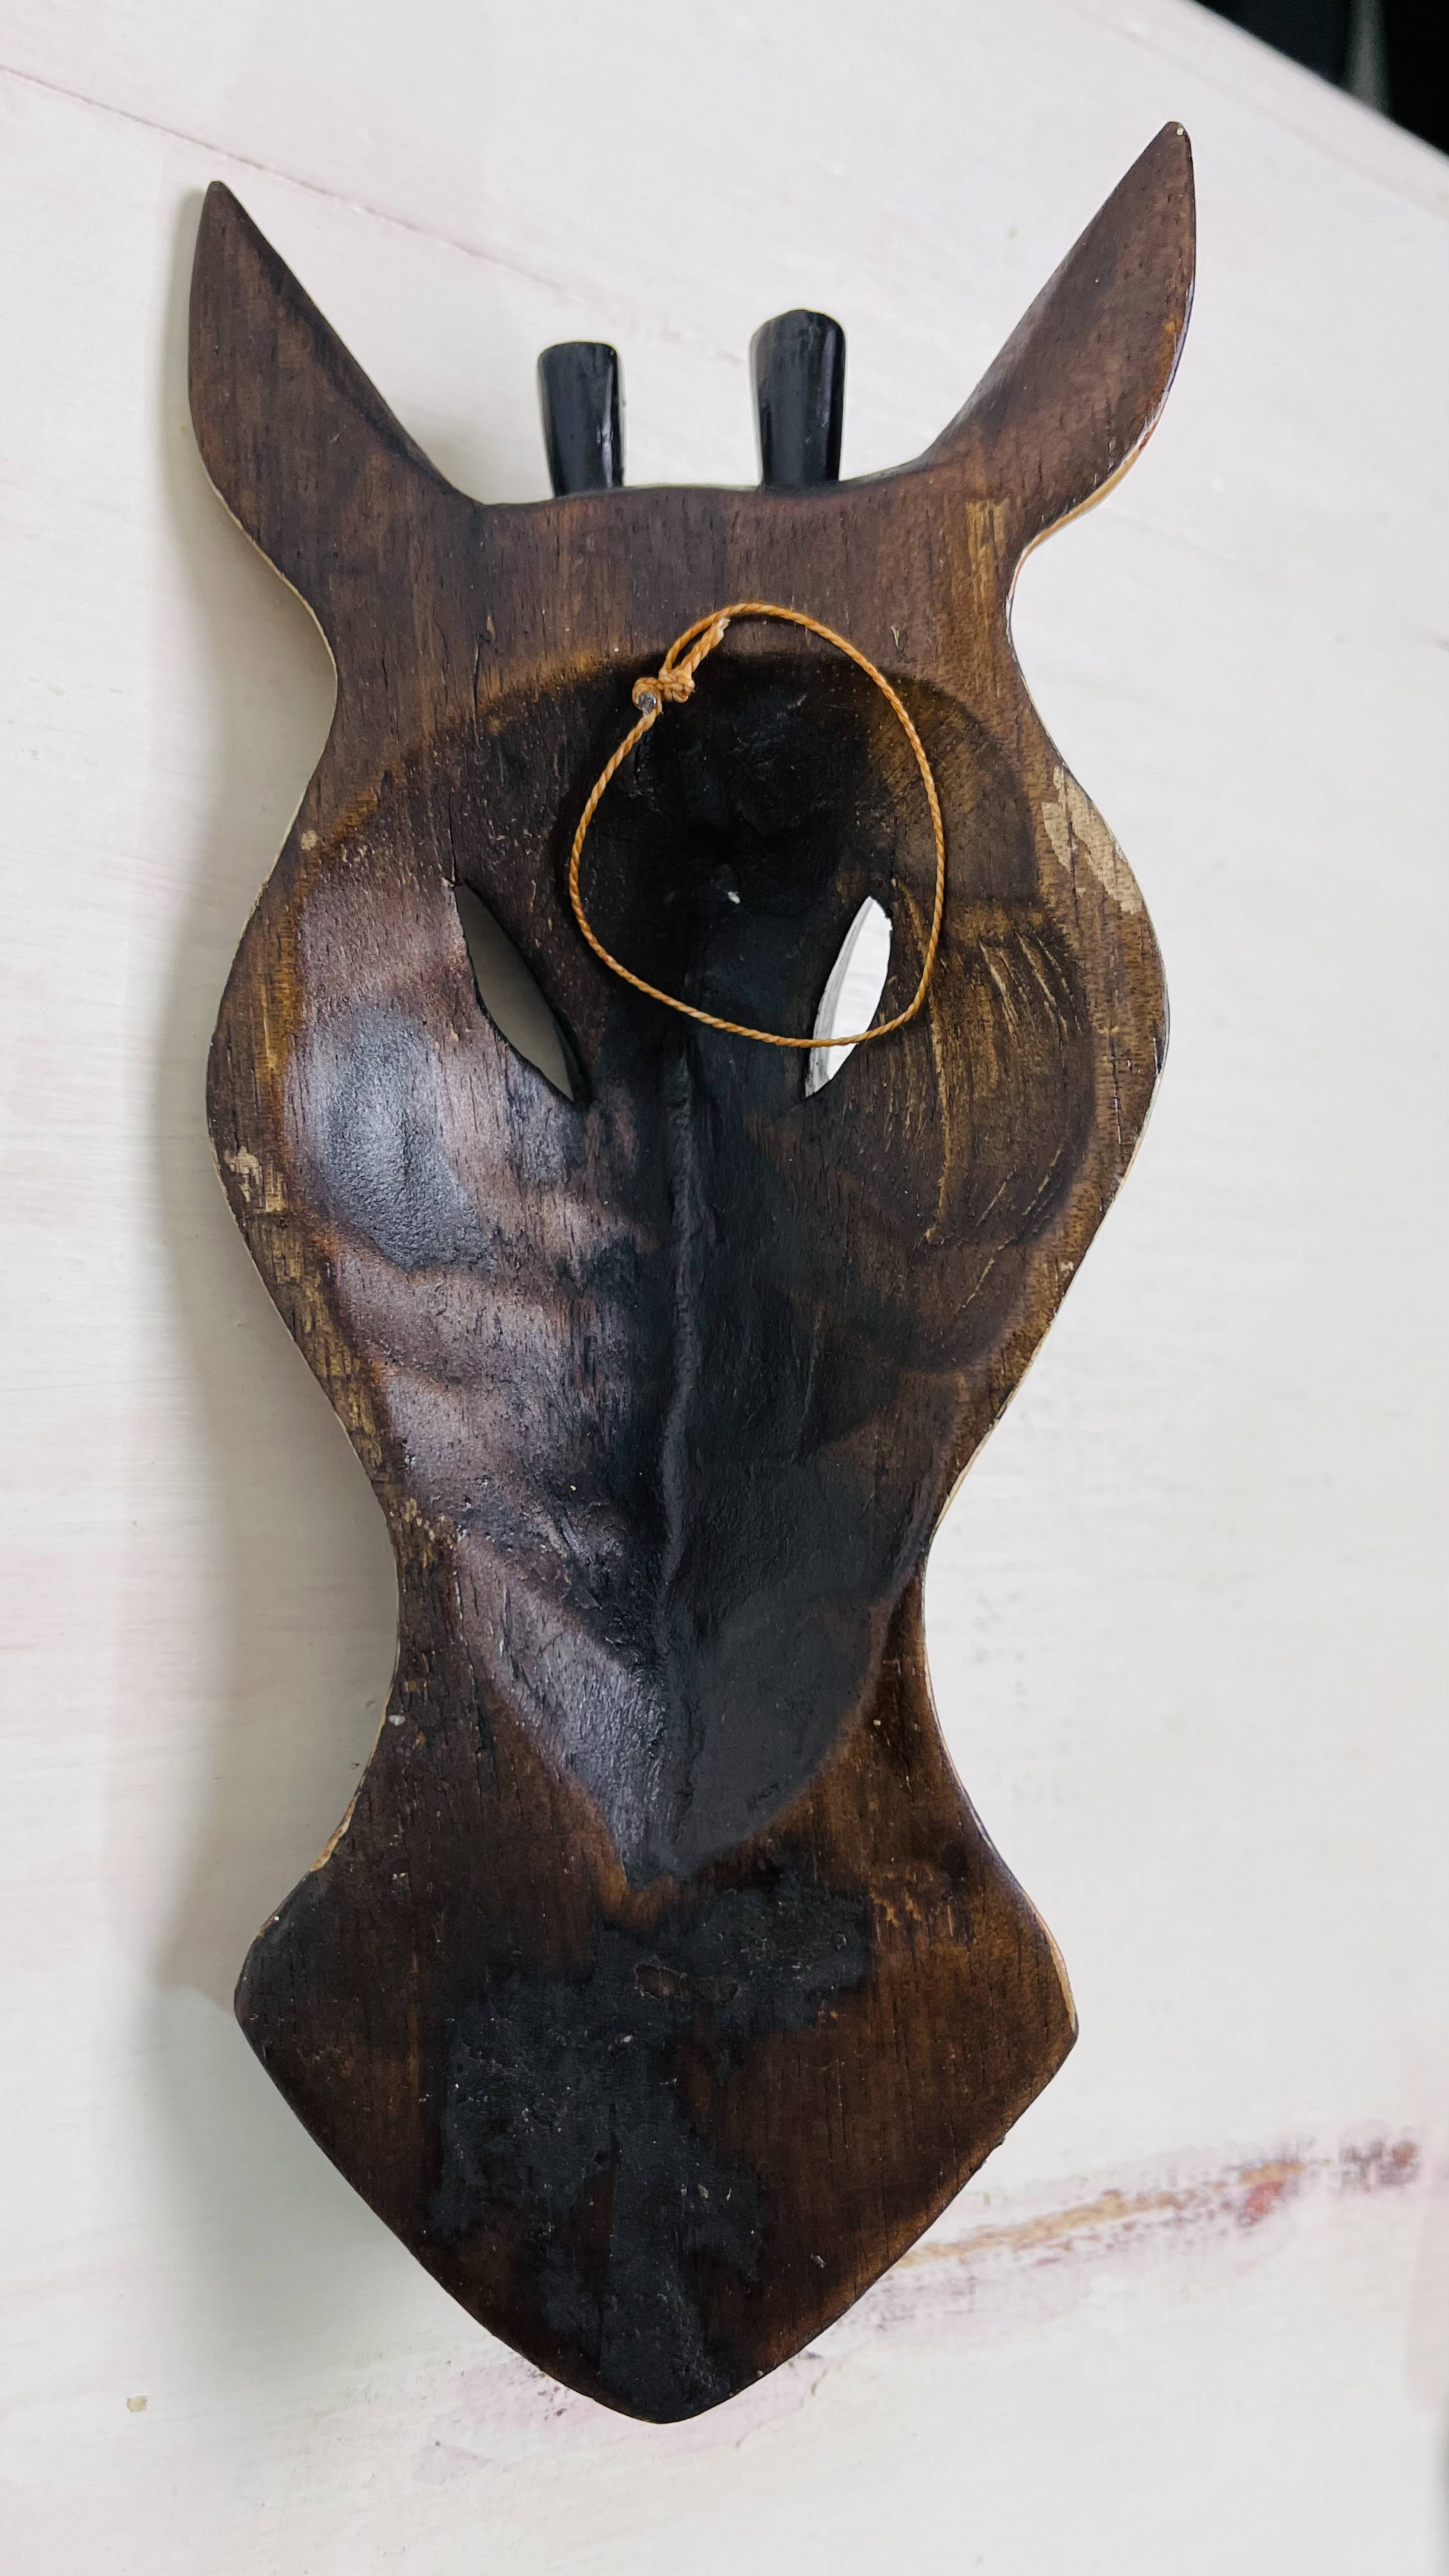 back view of wood mask with hook attached